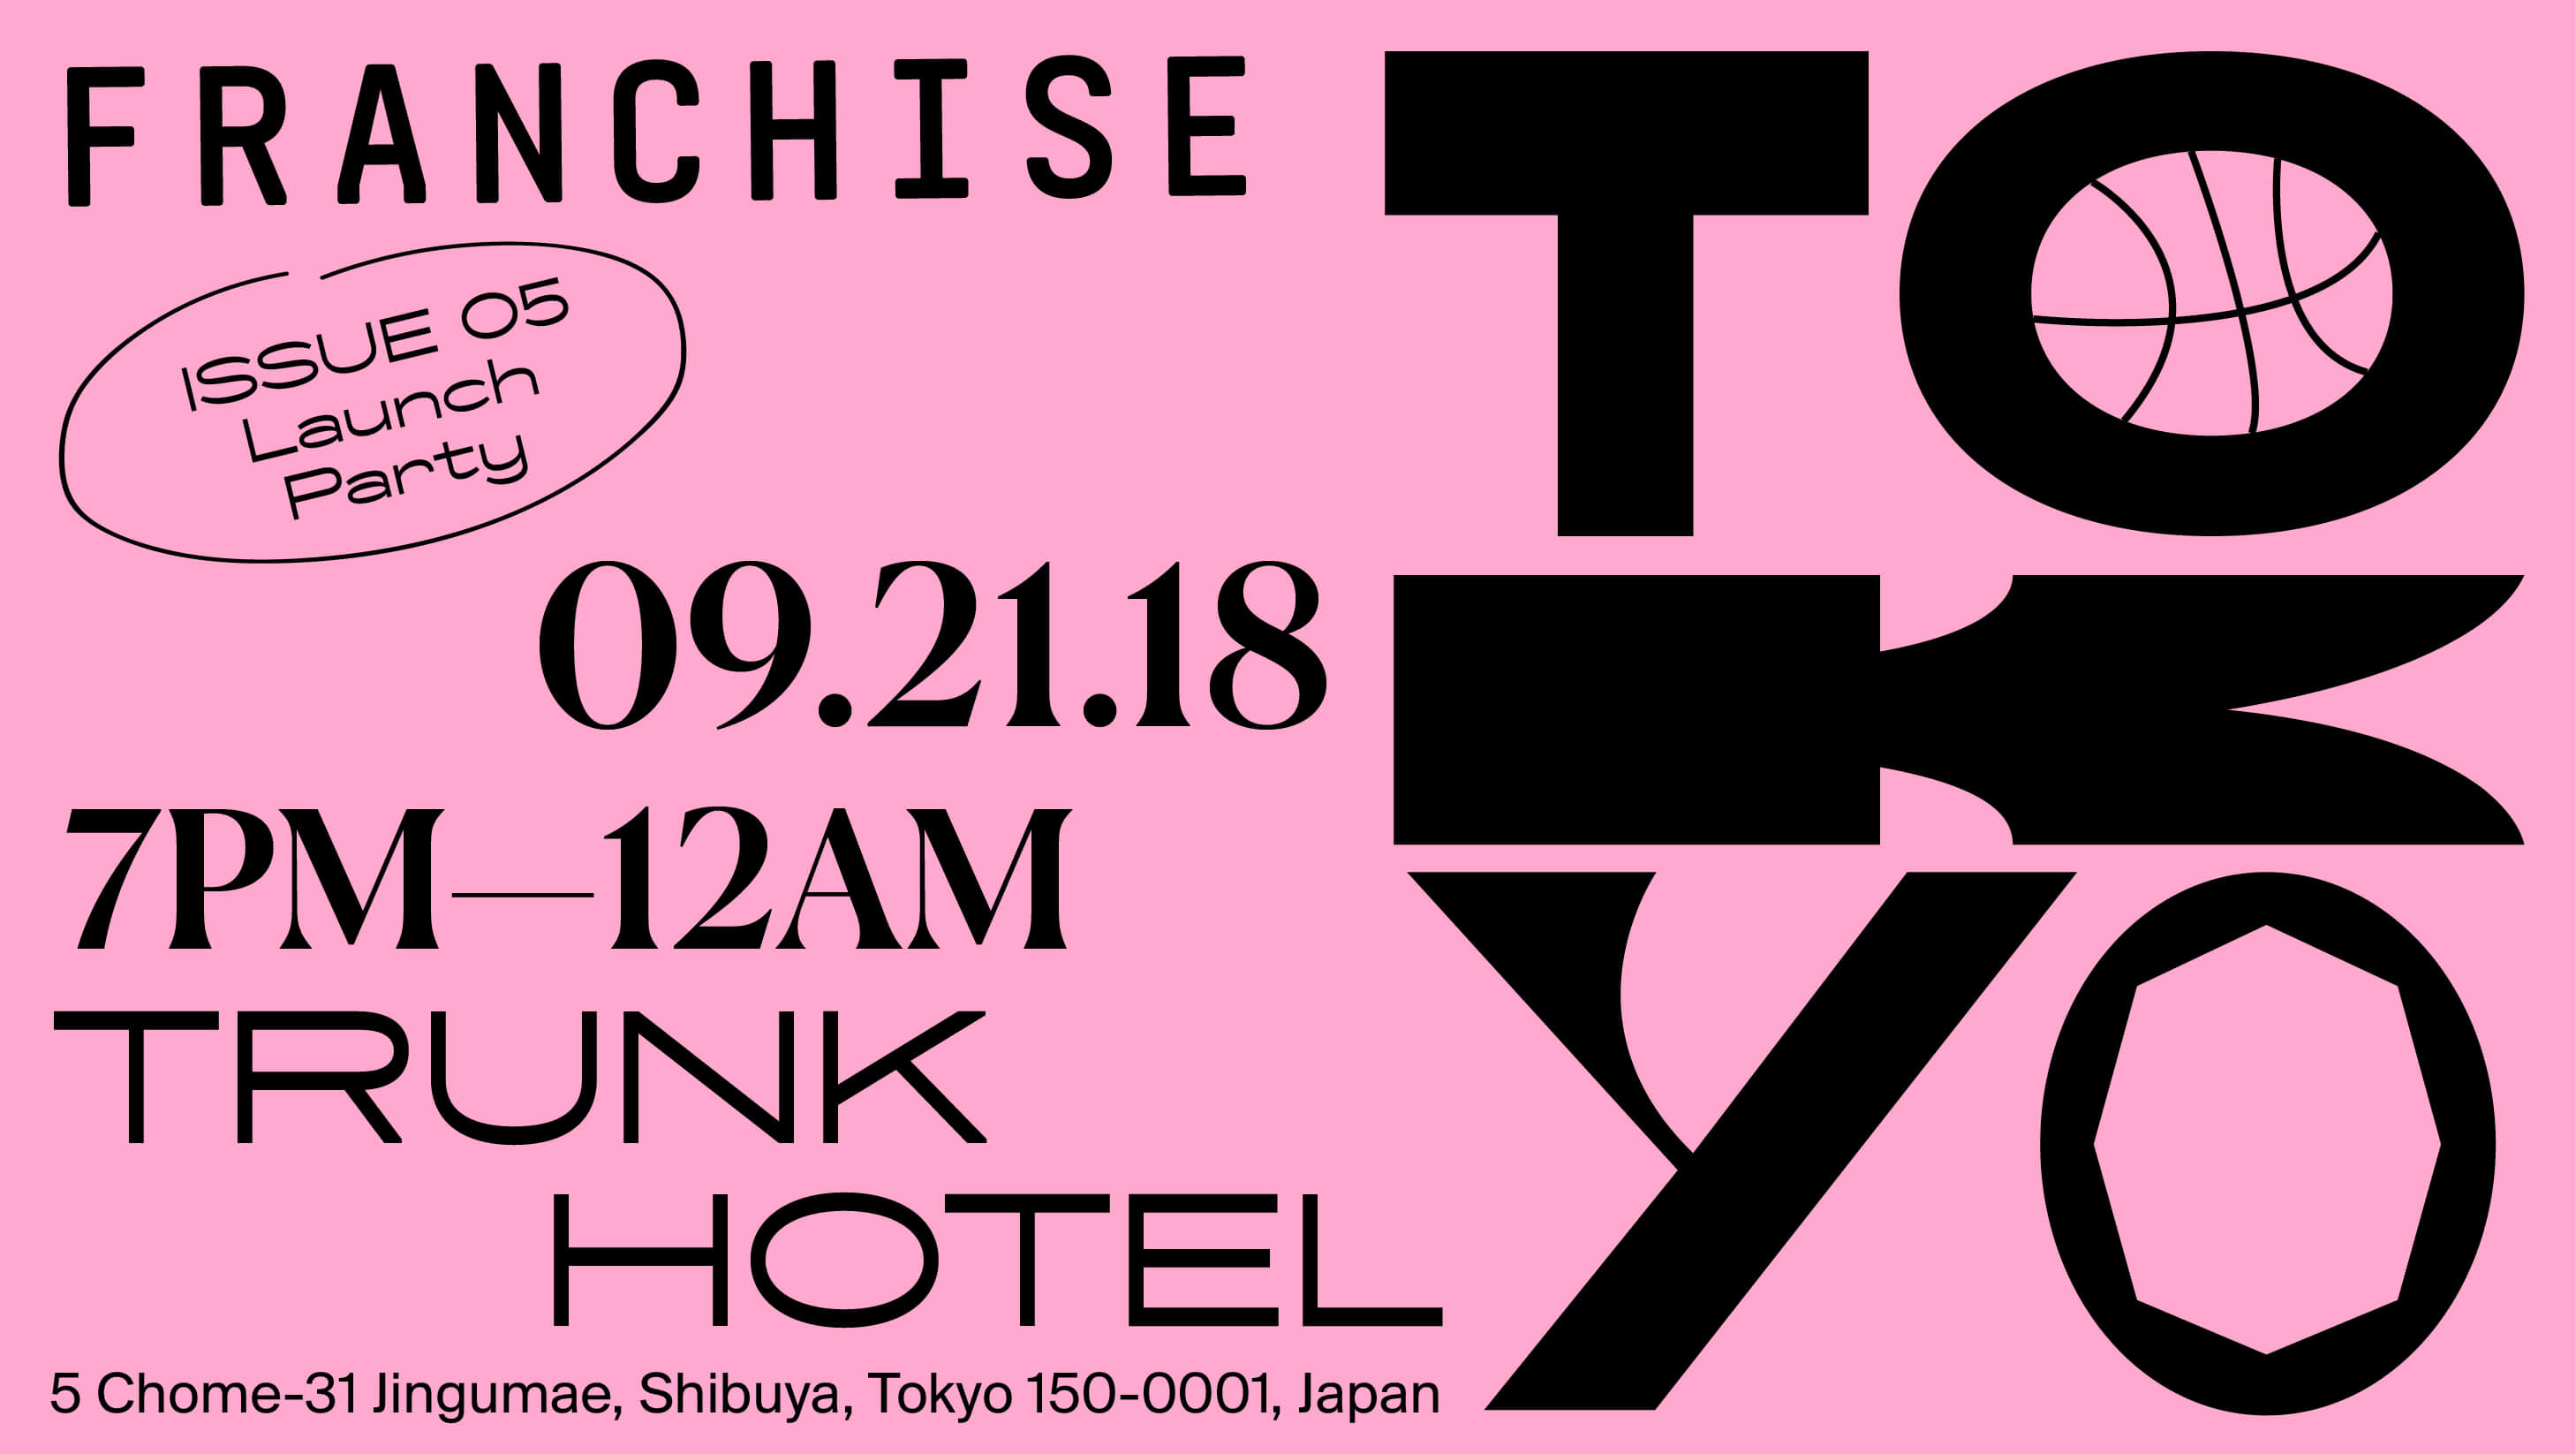 Franchise Issue 5 Tokyo Launch Party